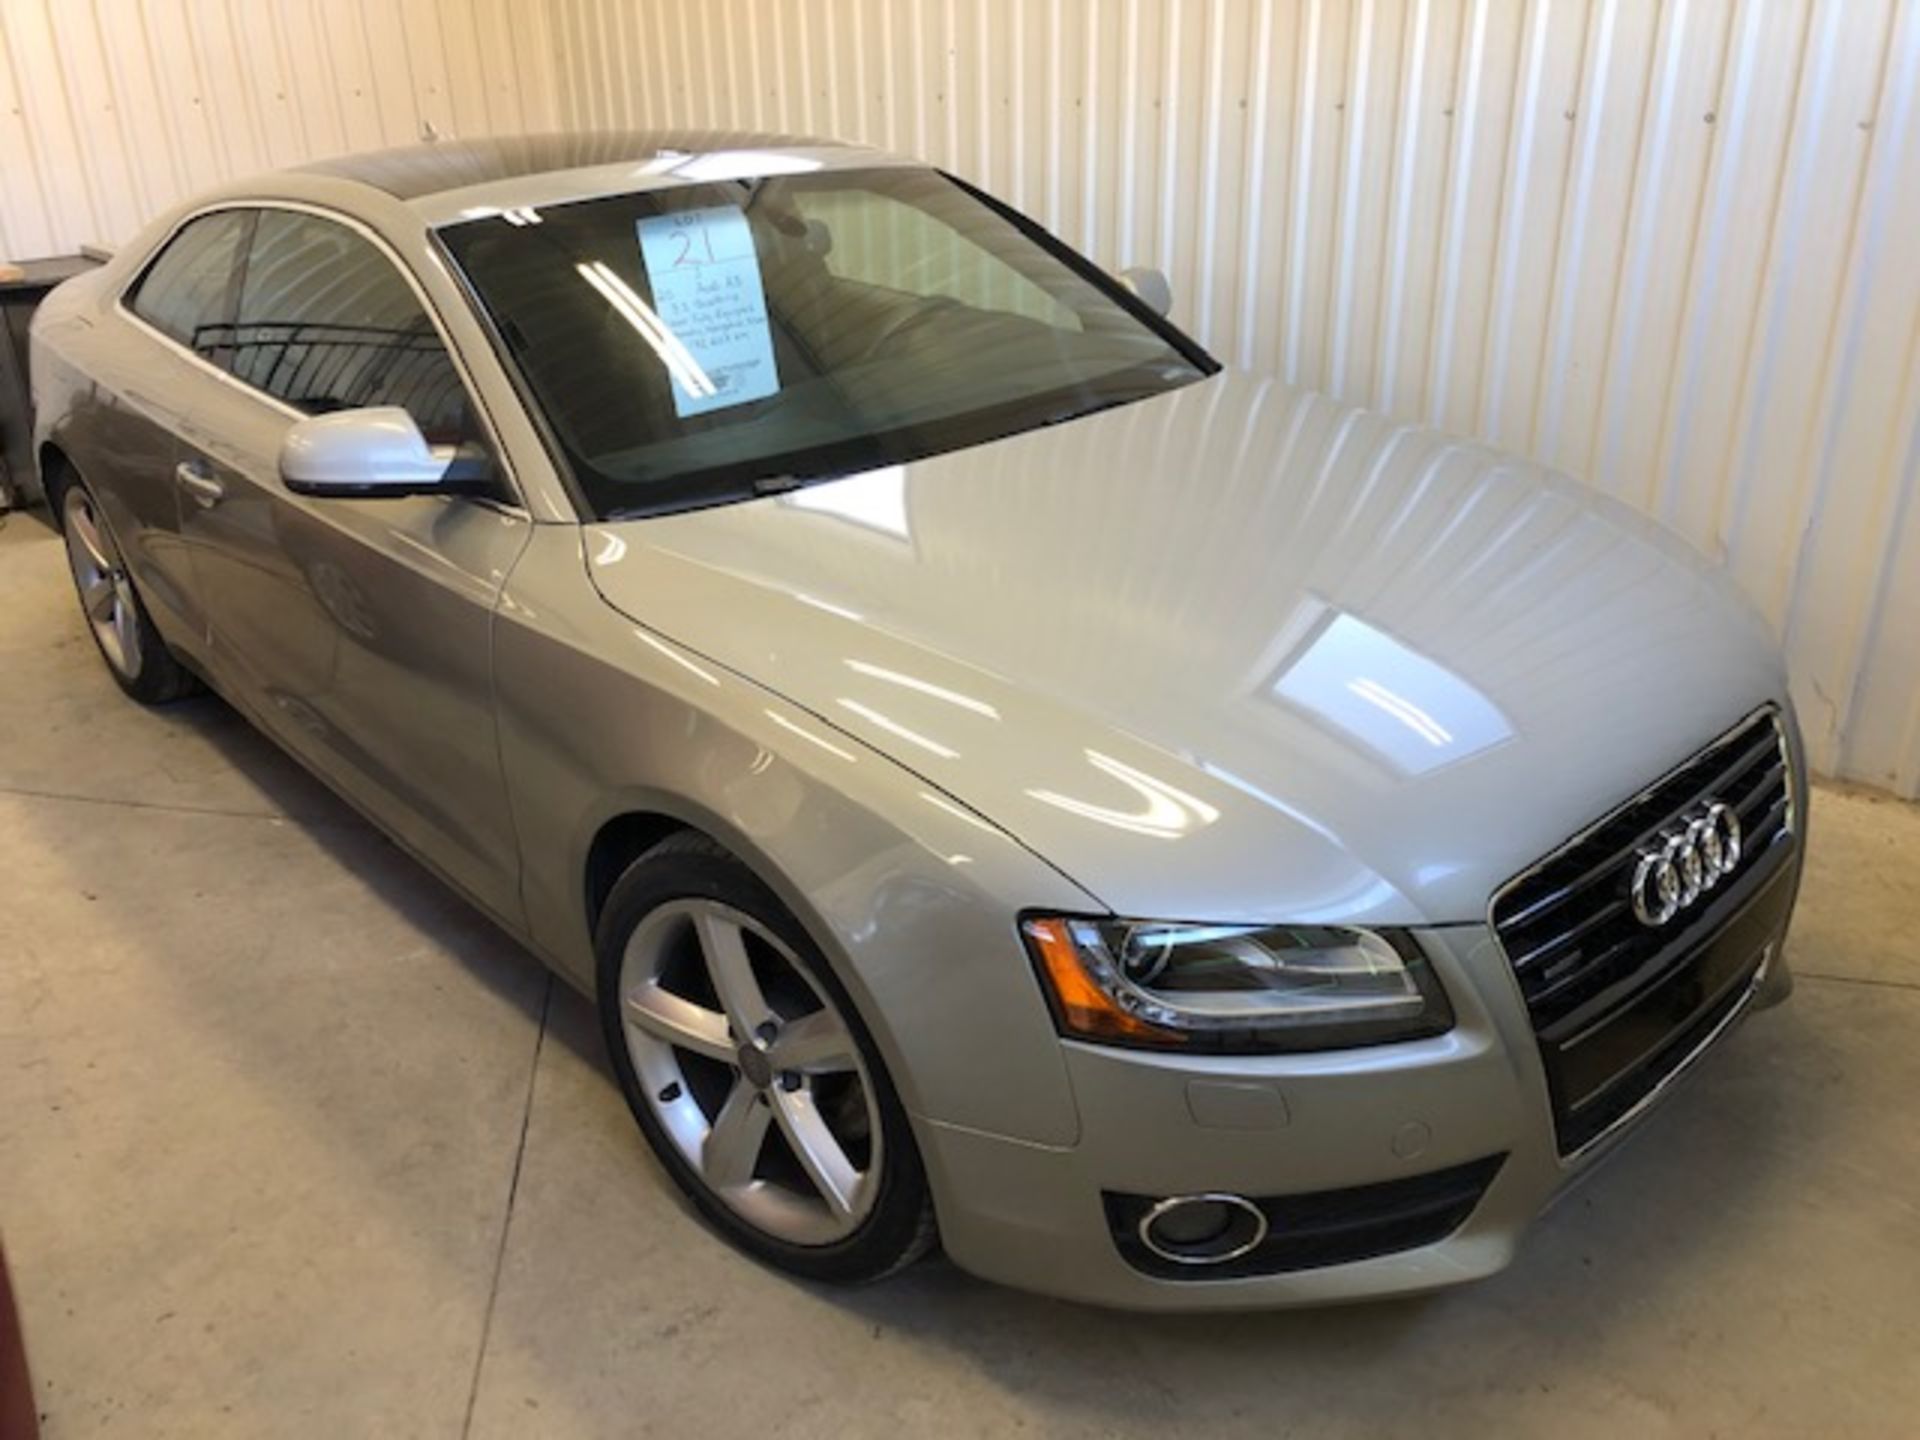 (2010 Audi A5 - 3.2 Quattro, 2 door Fully Equipped. 172,603km Vin: WAUCKBFR5AA045369